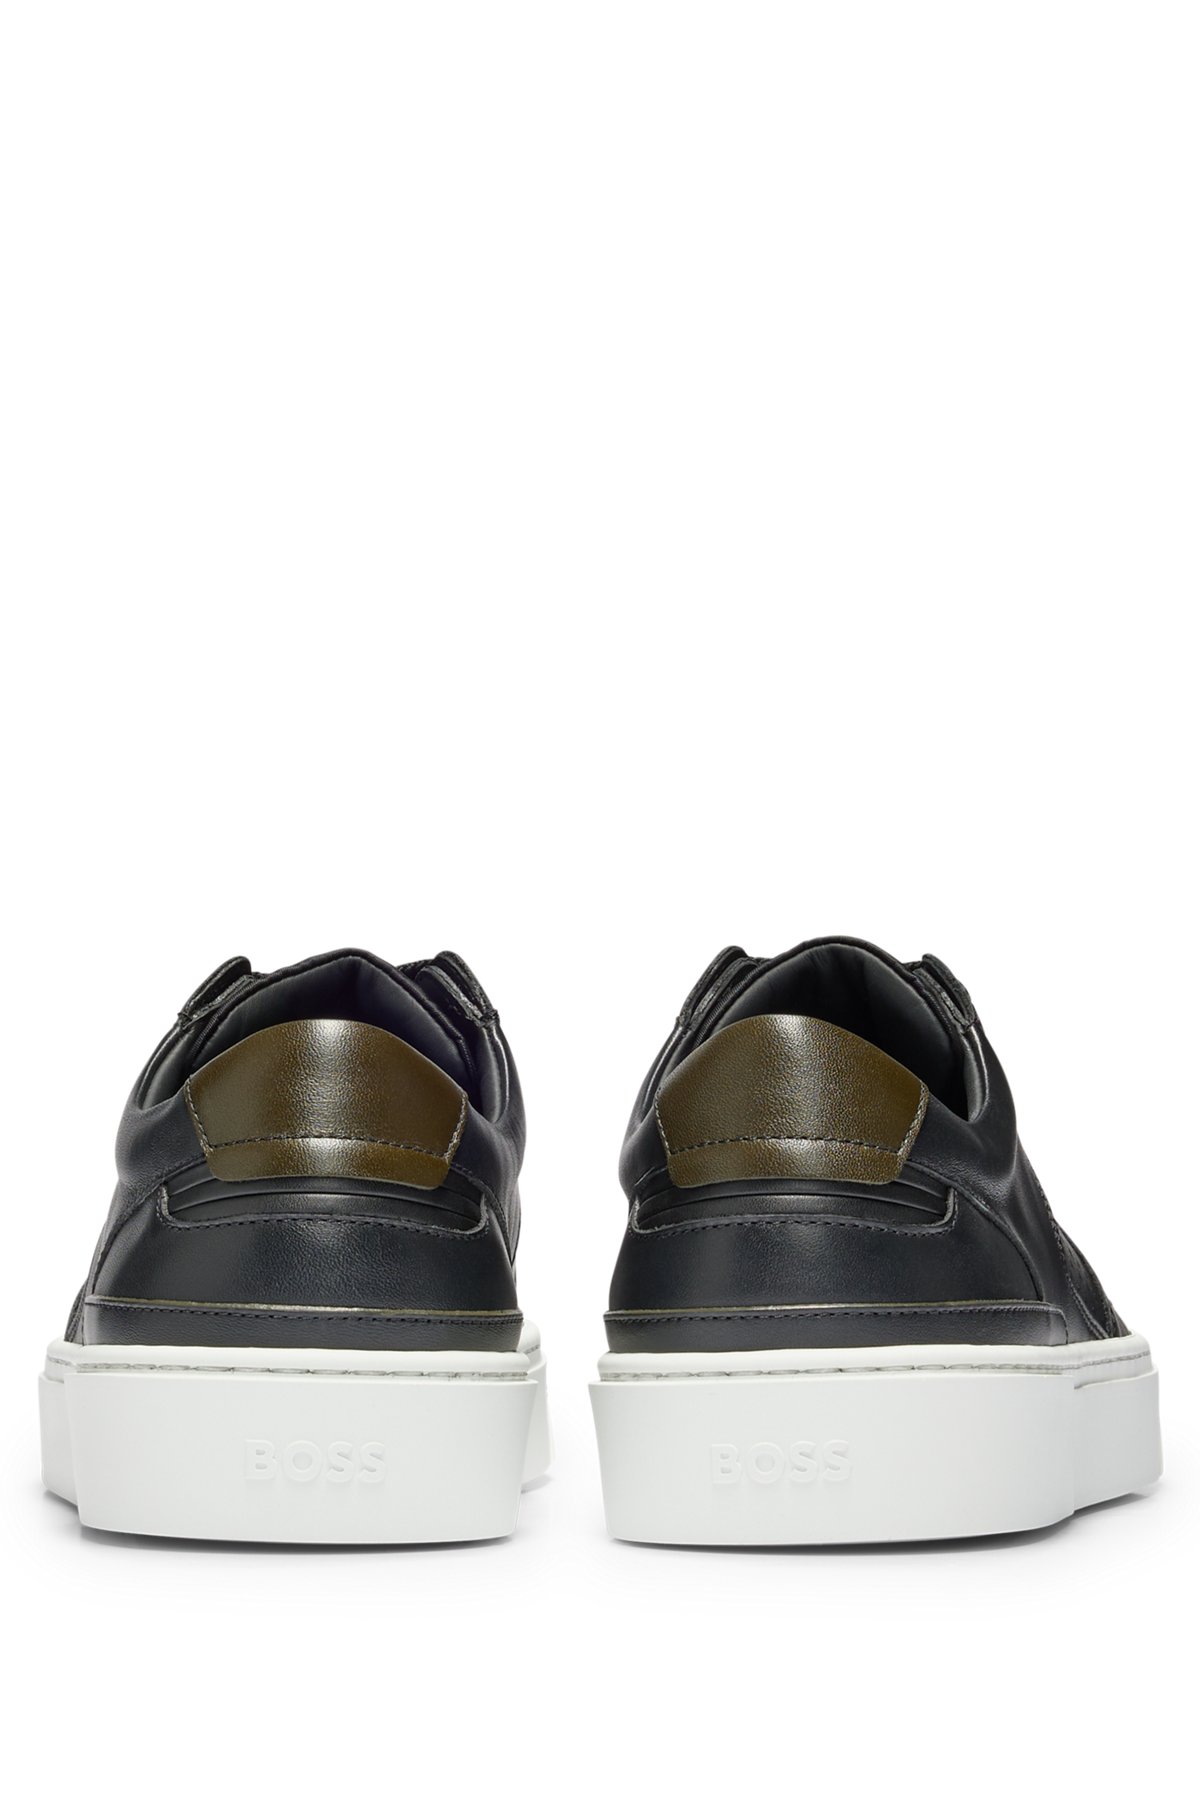 Porsche x BOSS branded low-top trainers in mixed materials, Black